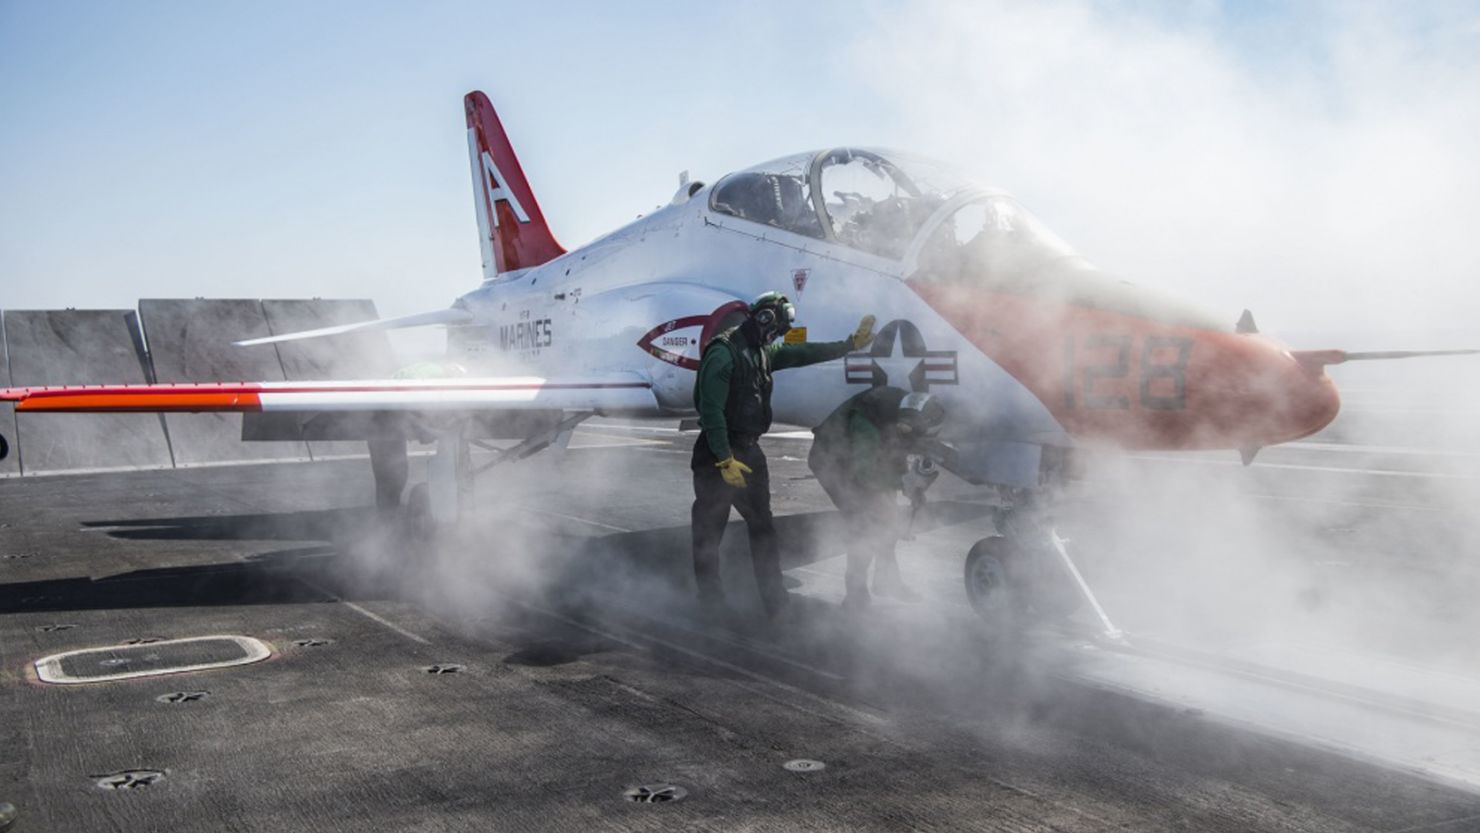  A T-45C Goshawk assigned to Carrier Training Wing 1 prepares to launch from the flight deck of the aircraft carrier USS Dwight D. Eisenhower.